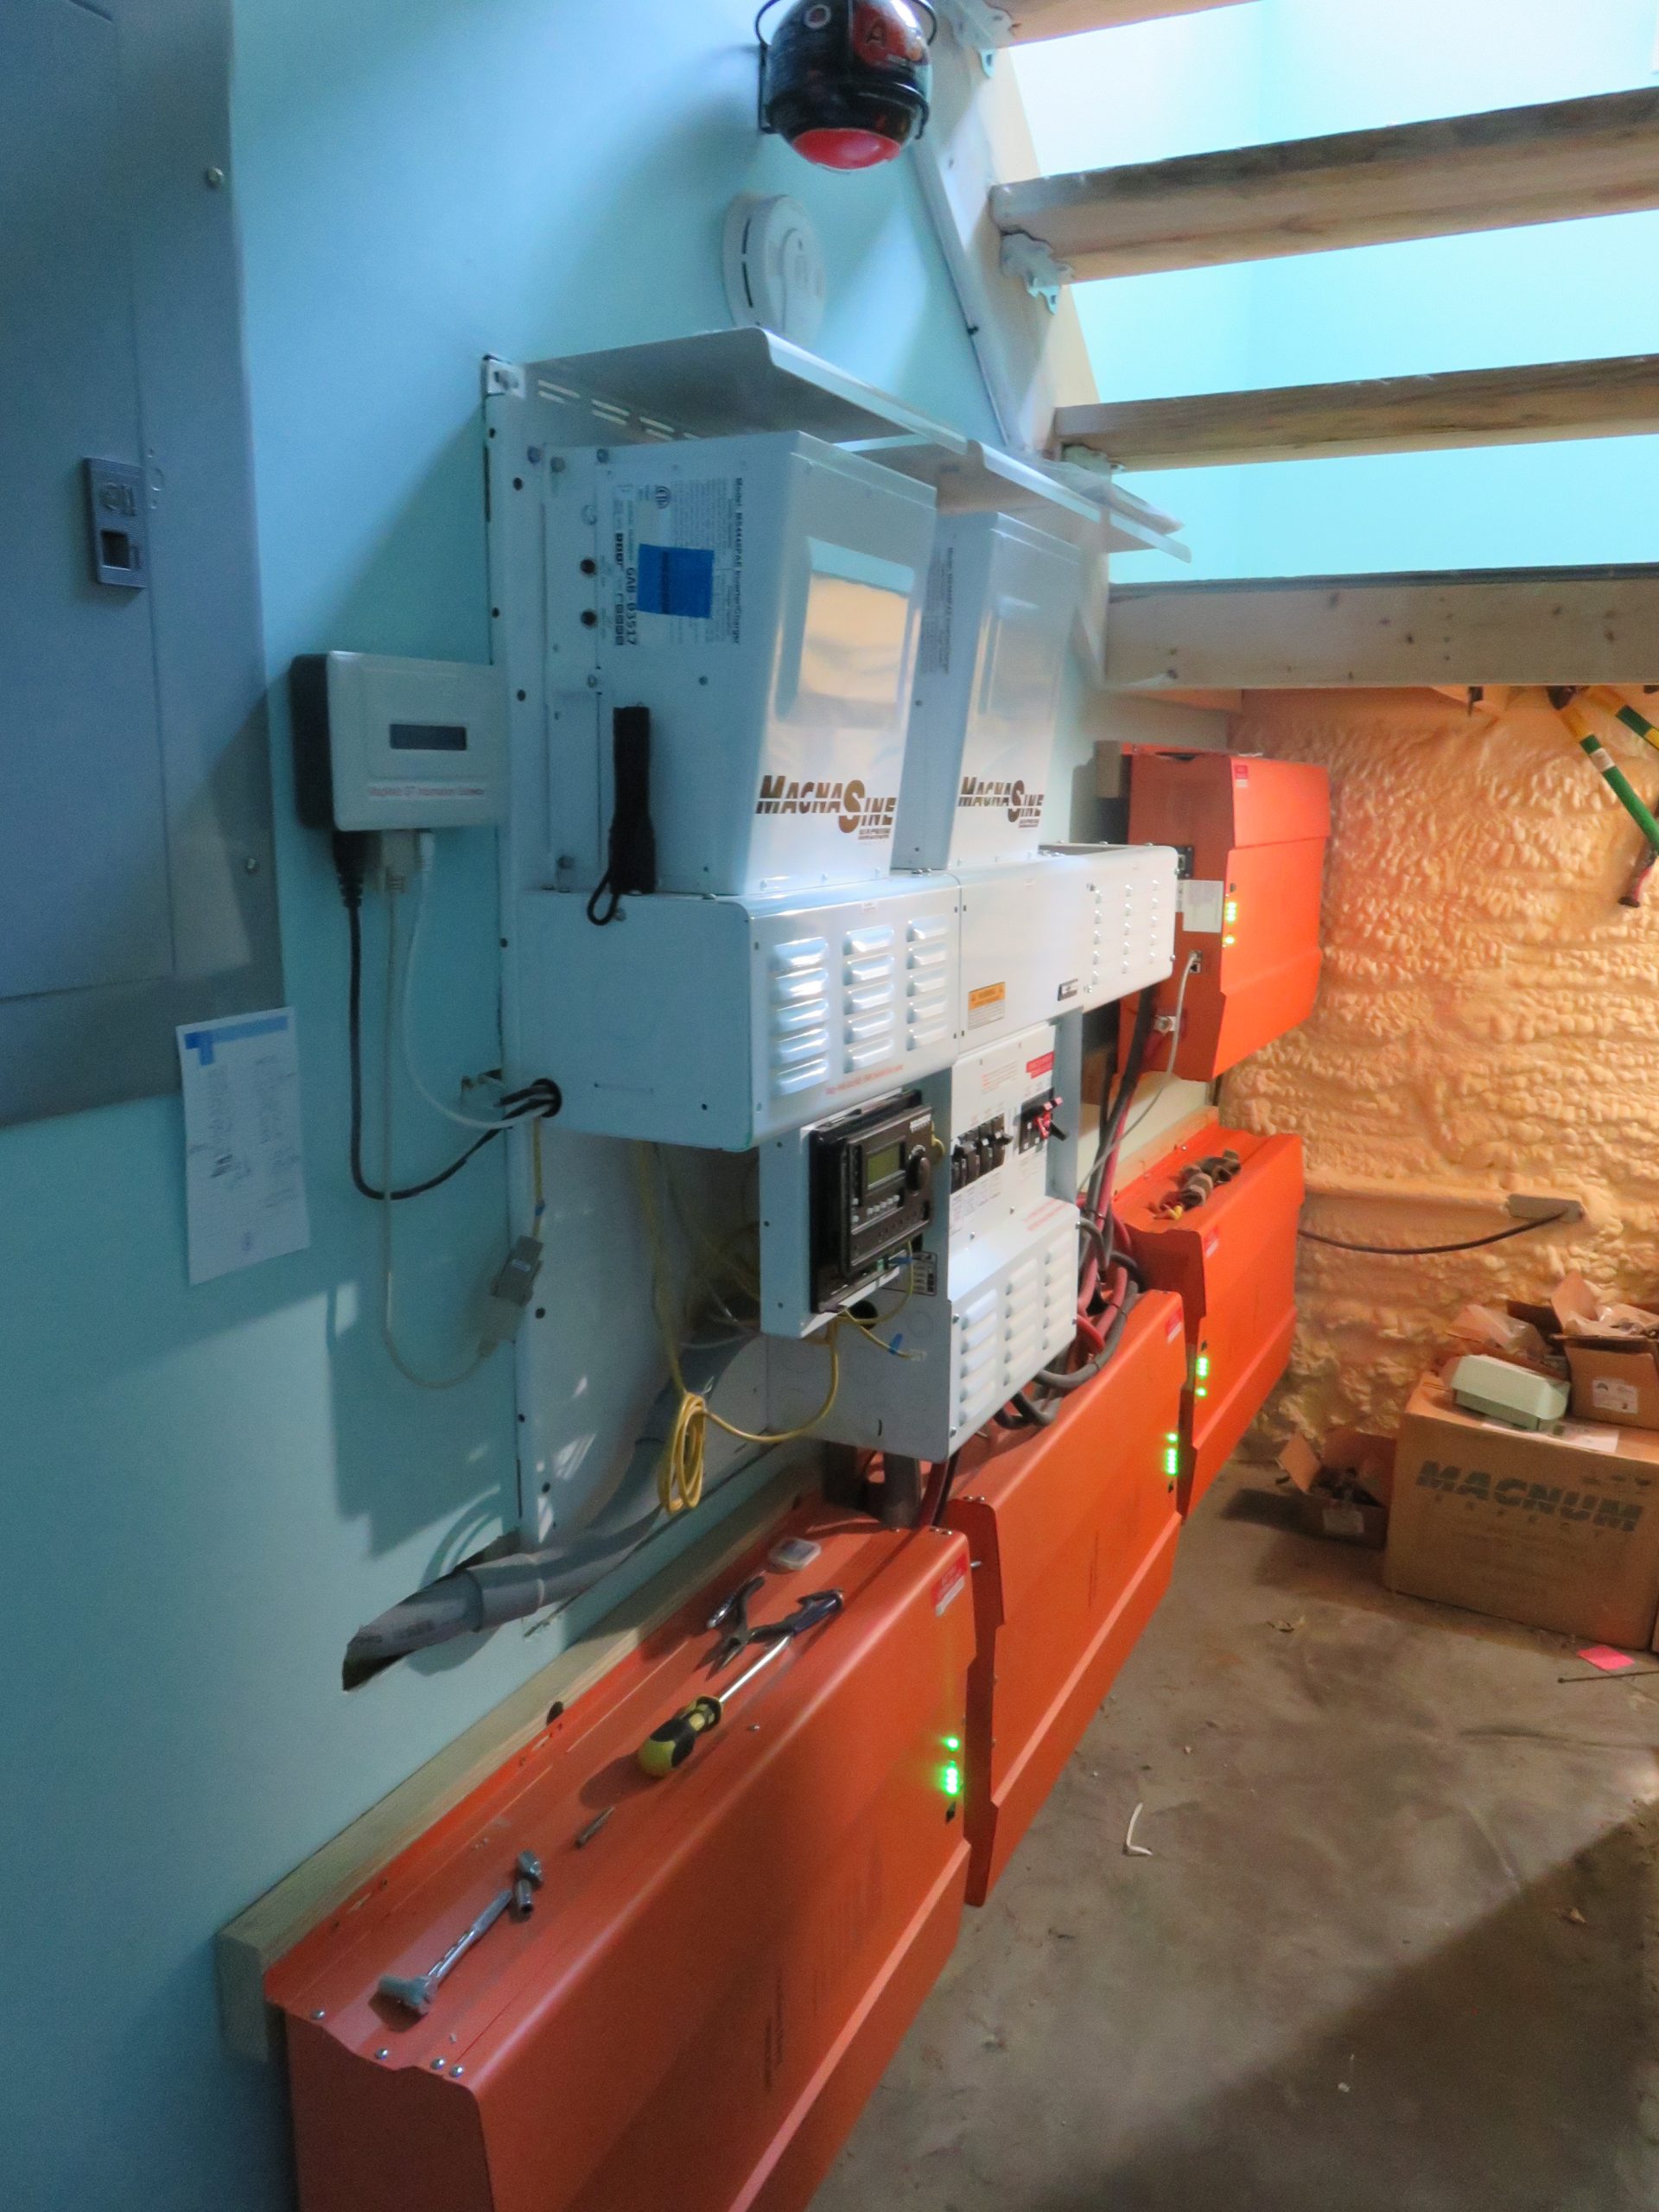 Breaker boxes and battery inverter wall by Keowee Home Solar